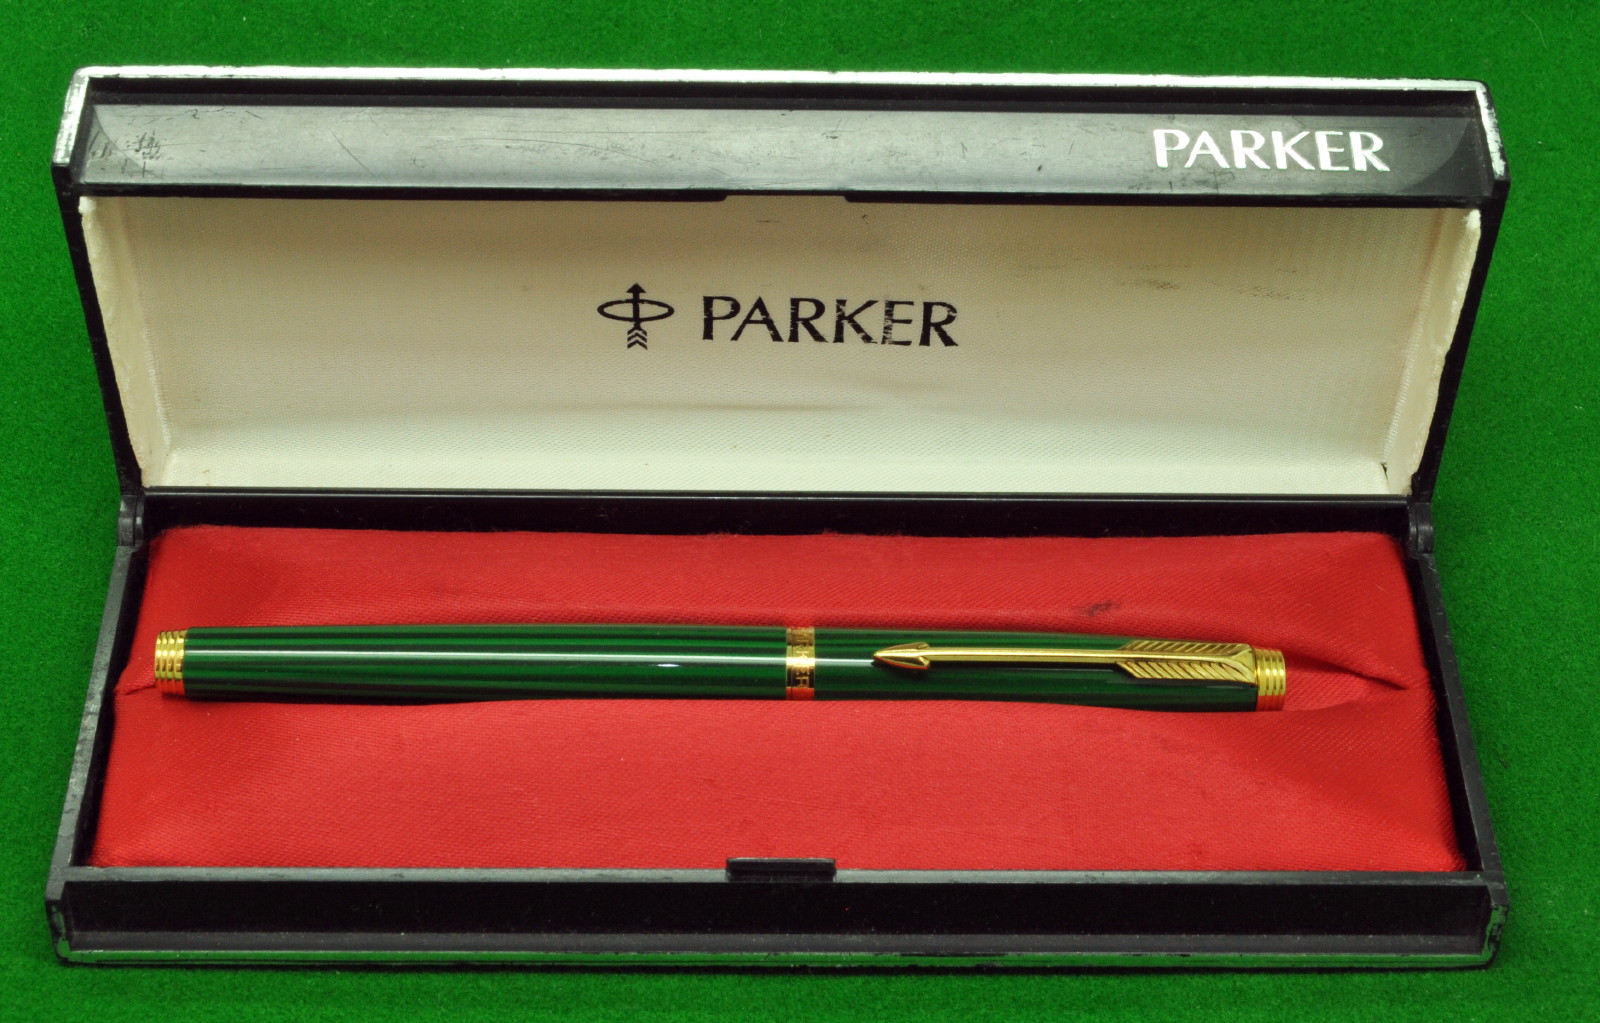 USA Parker Classic Sterling Silver Cisele /& Gold Ballpoint Pen In Box MINT